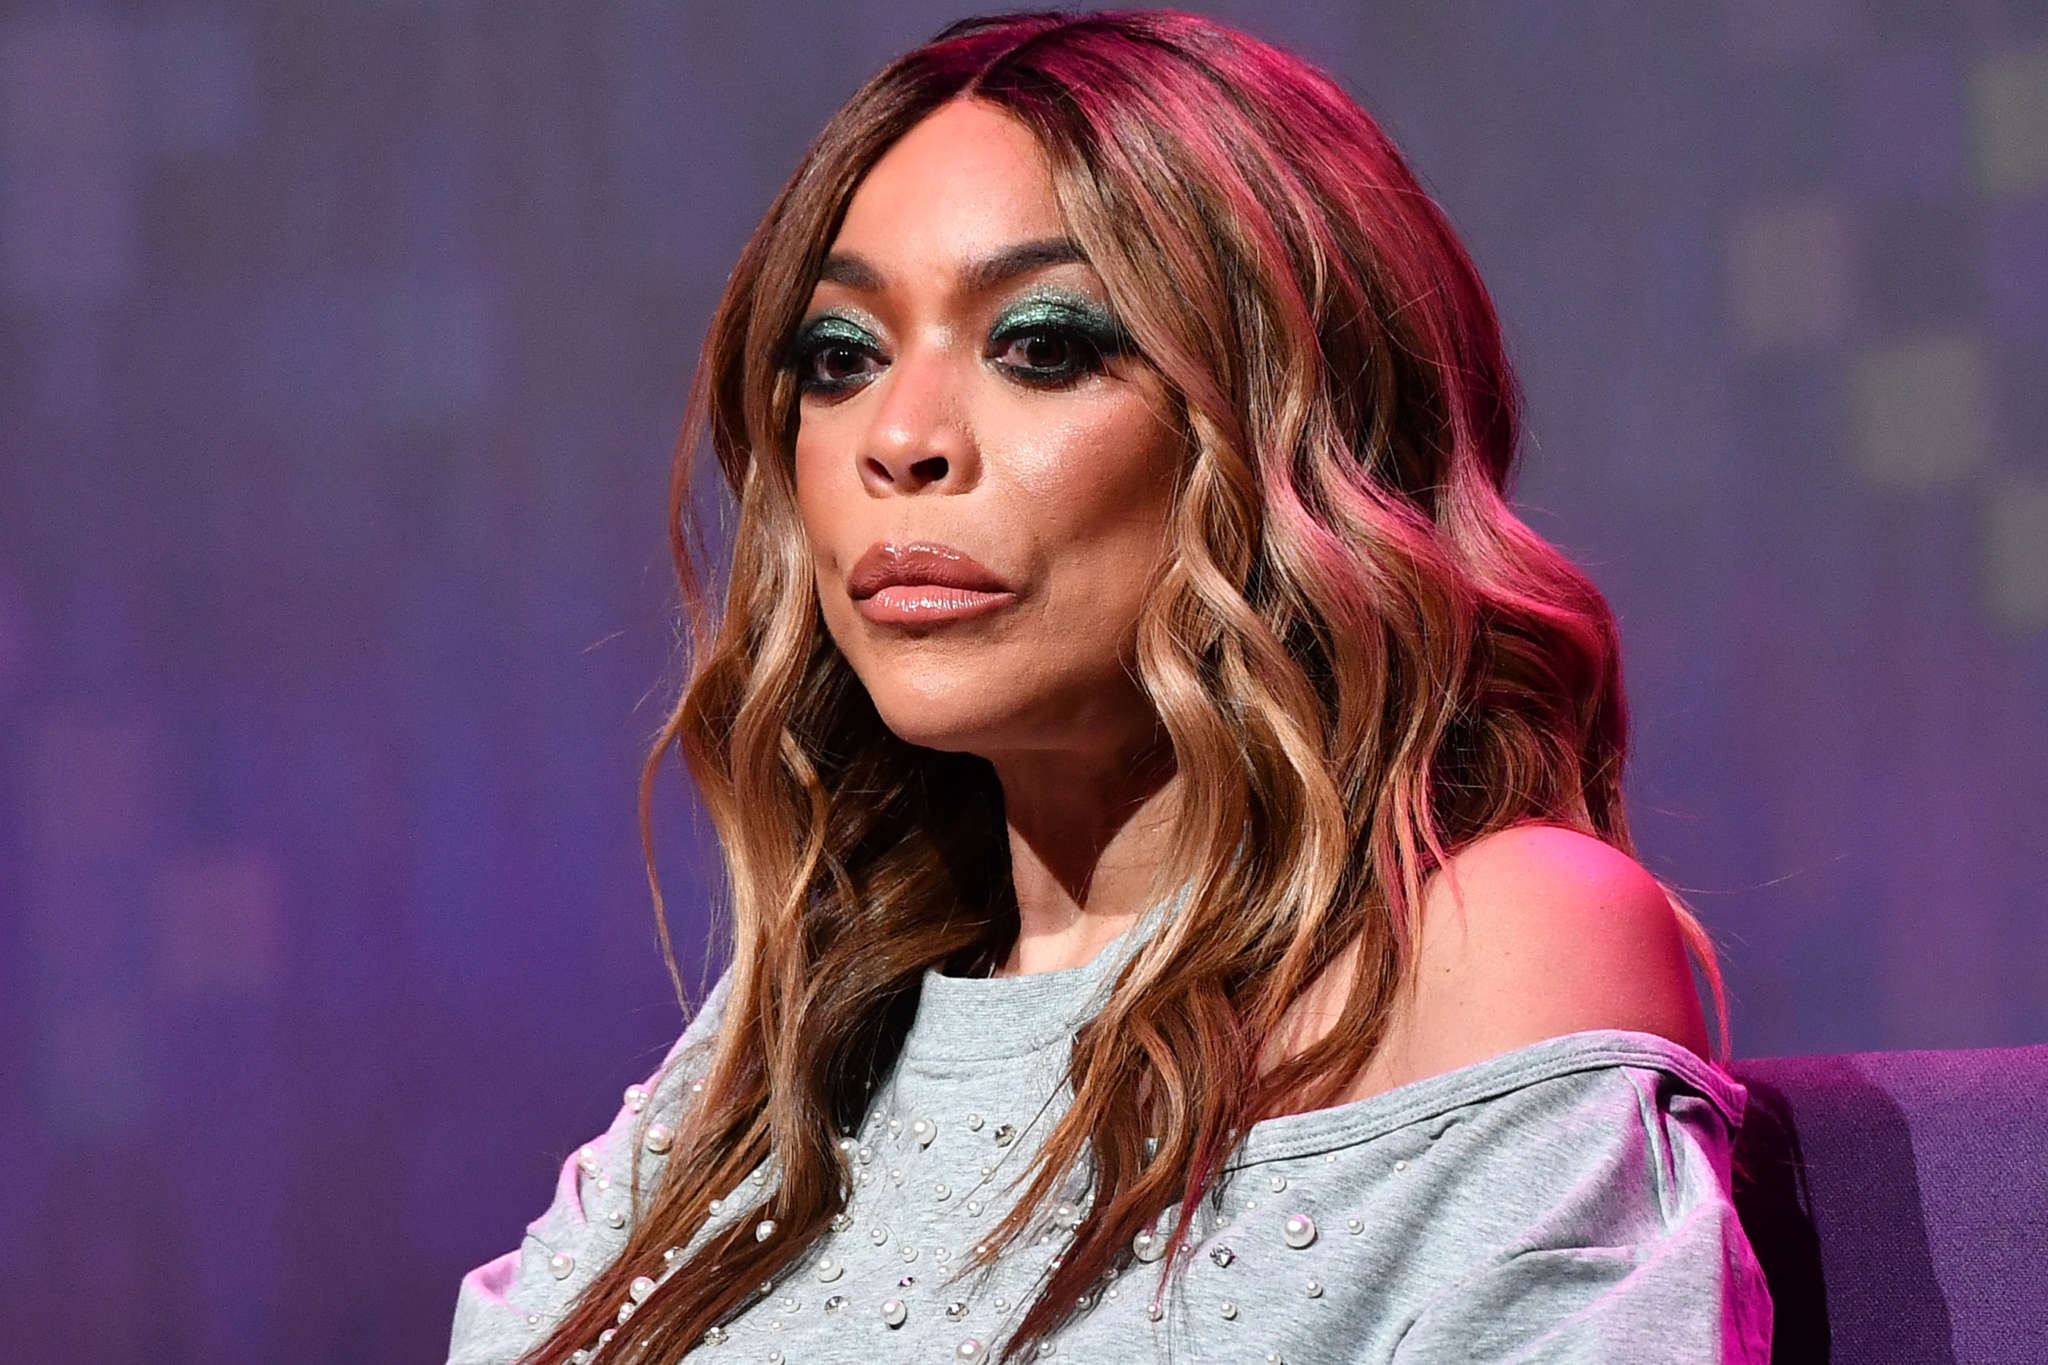 Wendy Williams Apologizes To The LGBTQ+ Community The Comments That She Made During Her Show - See The Video